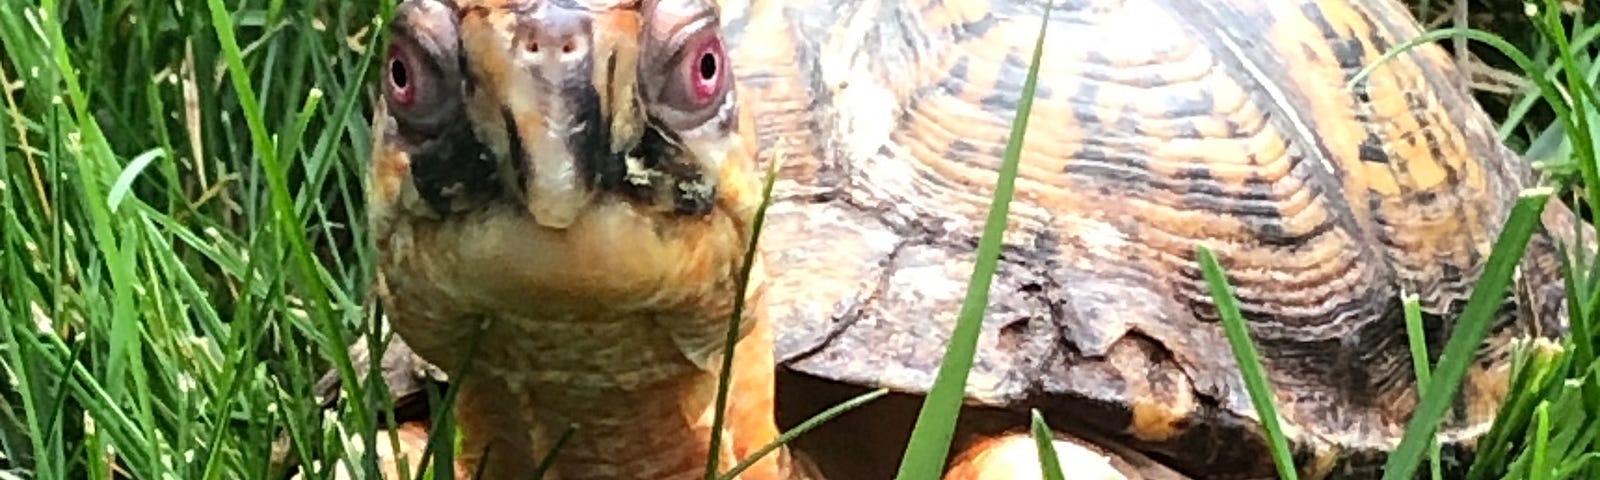 Orange-skinned box turtle with neck stretched up, looking at the camera